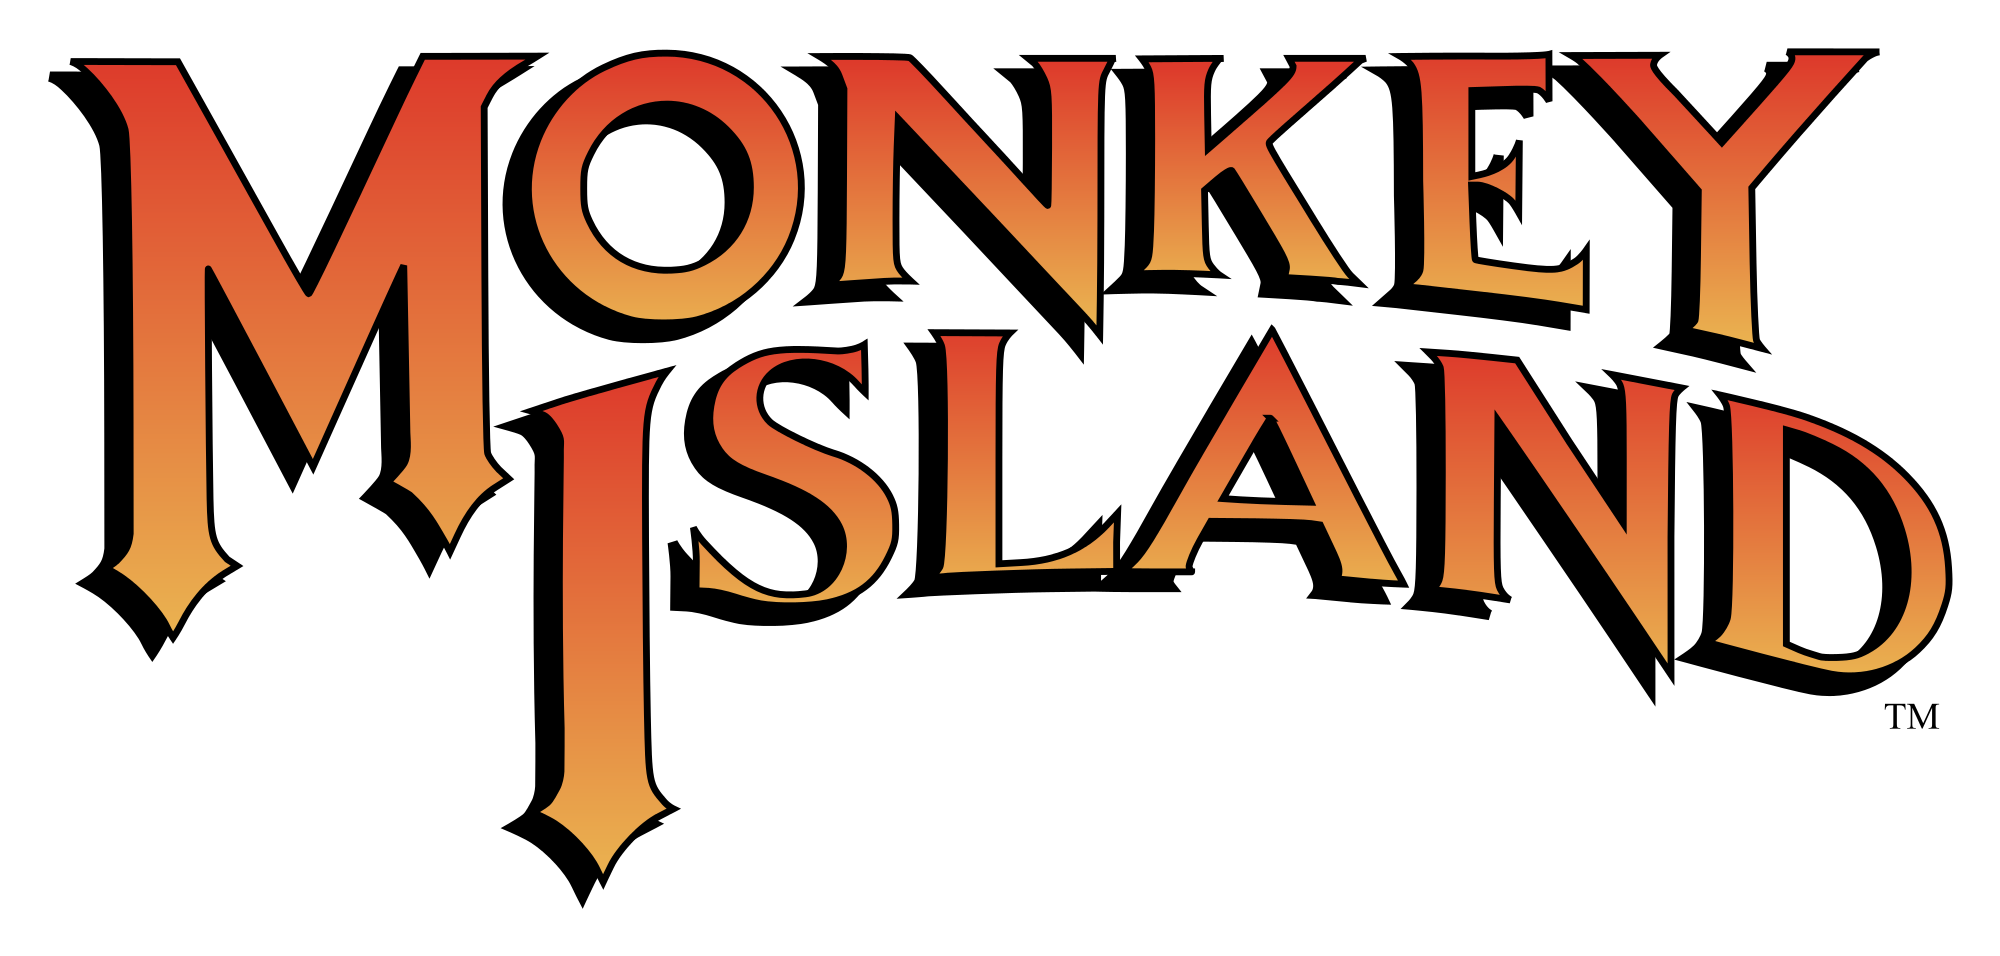 The Secret Of Monkey Island svg #19, Download drawings